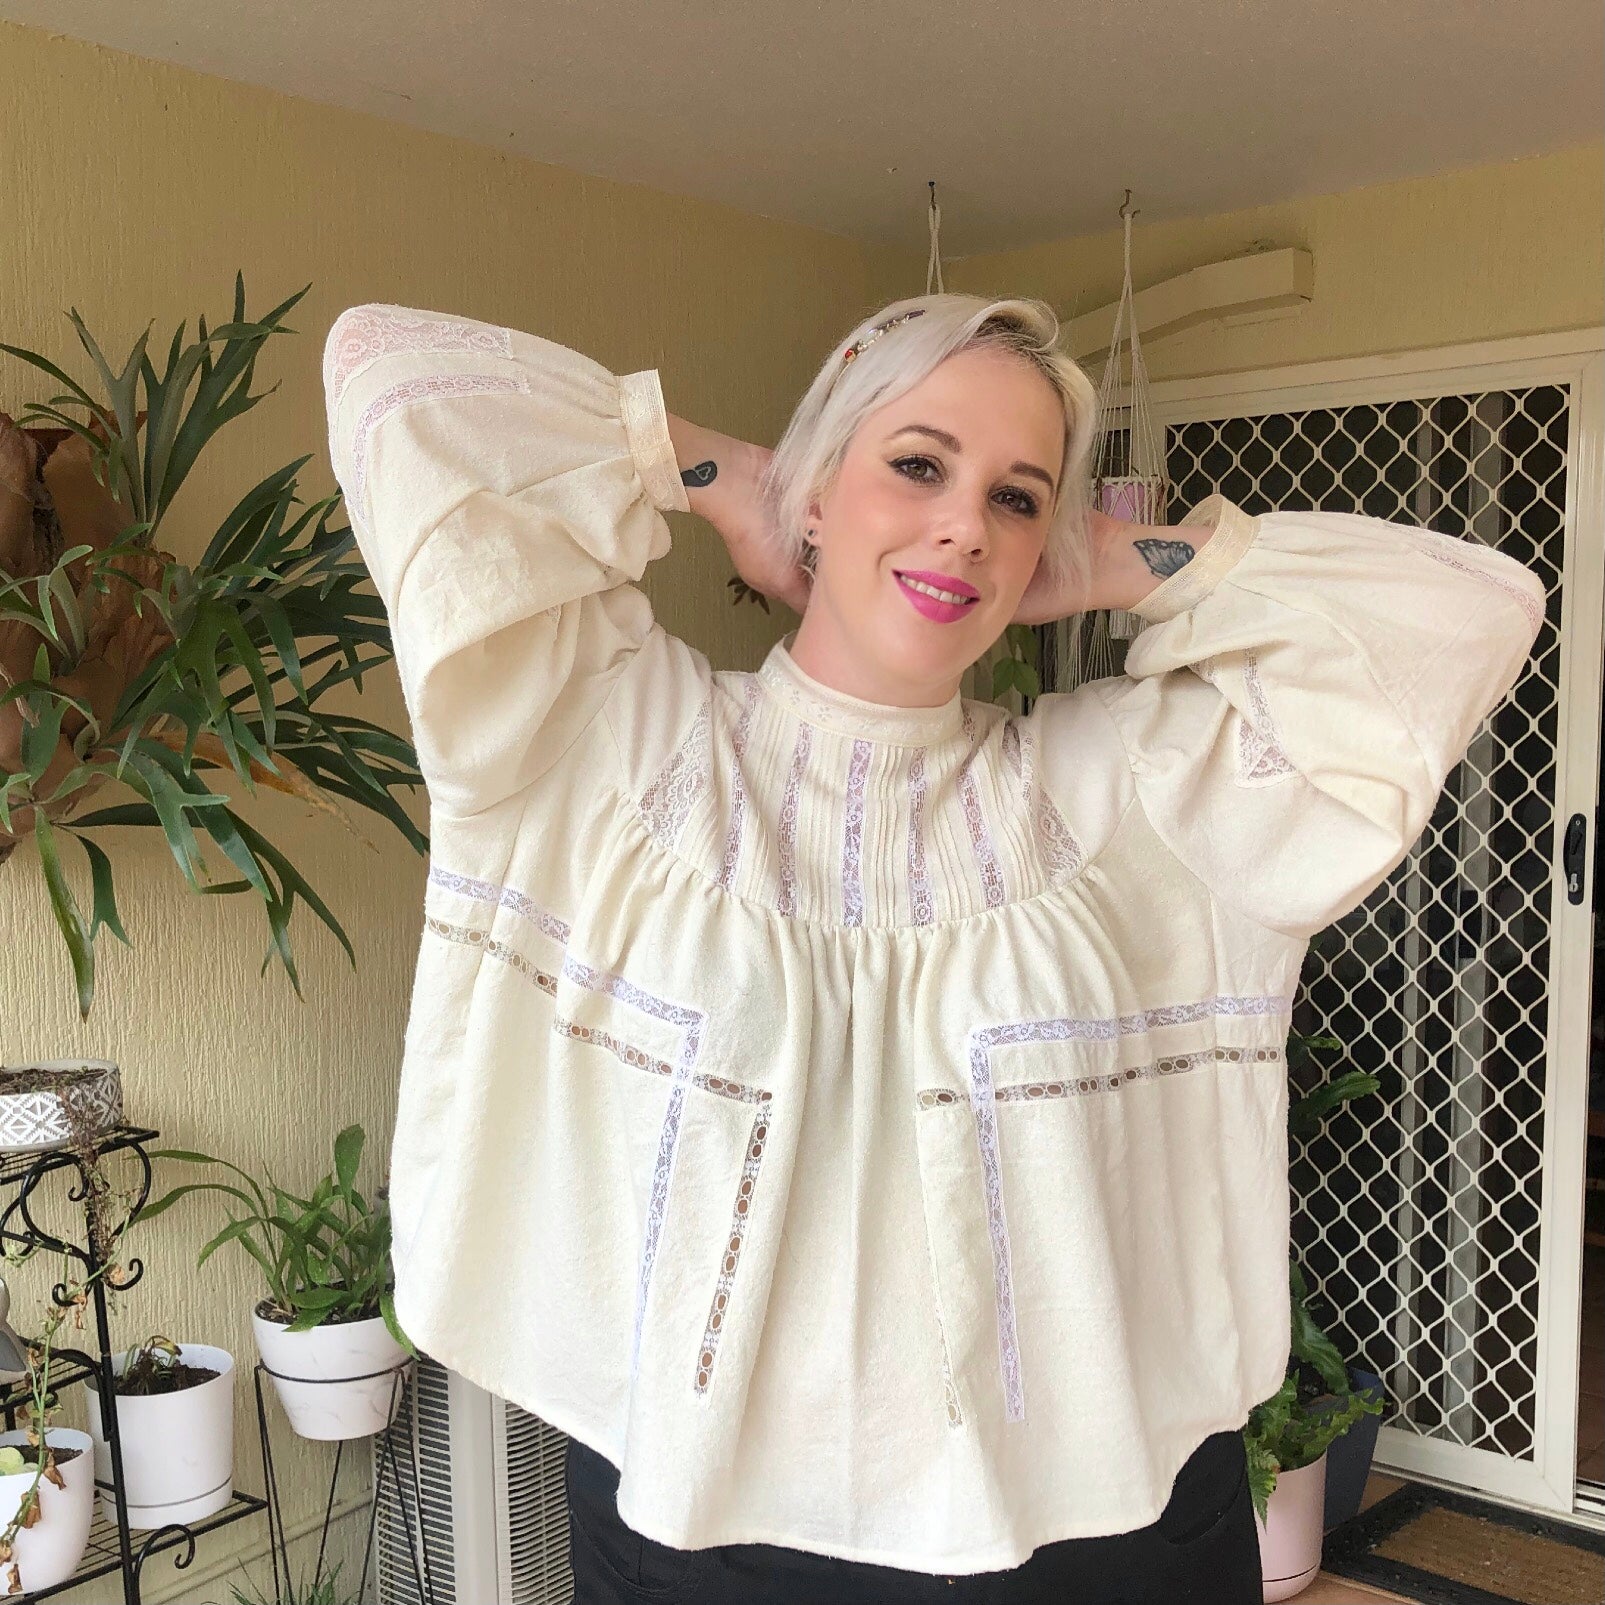 Shannon poses with her hands behind her head whilst smiling at the camera, showing the lace panel details across the front of her Gibson Girl Blouse